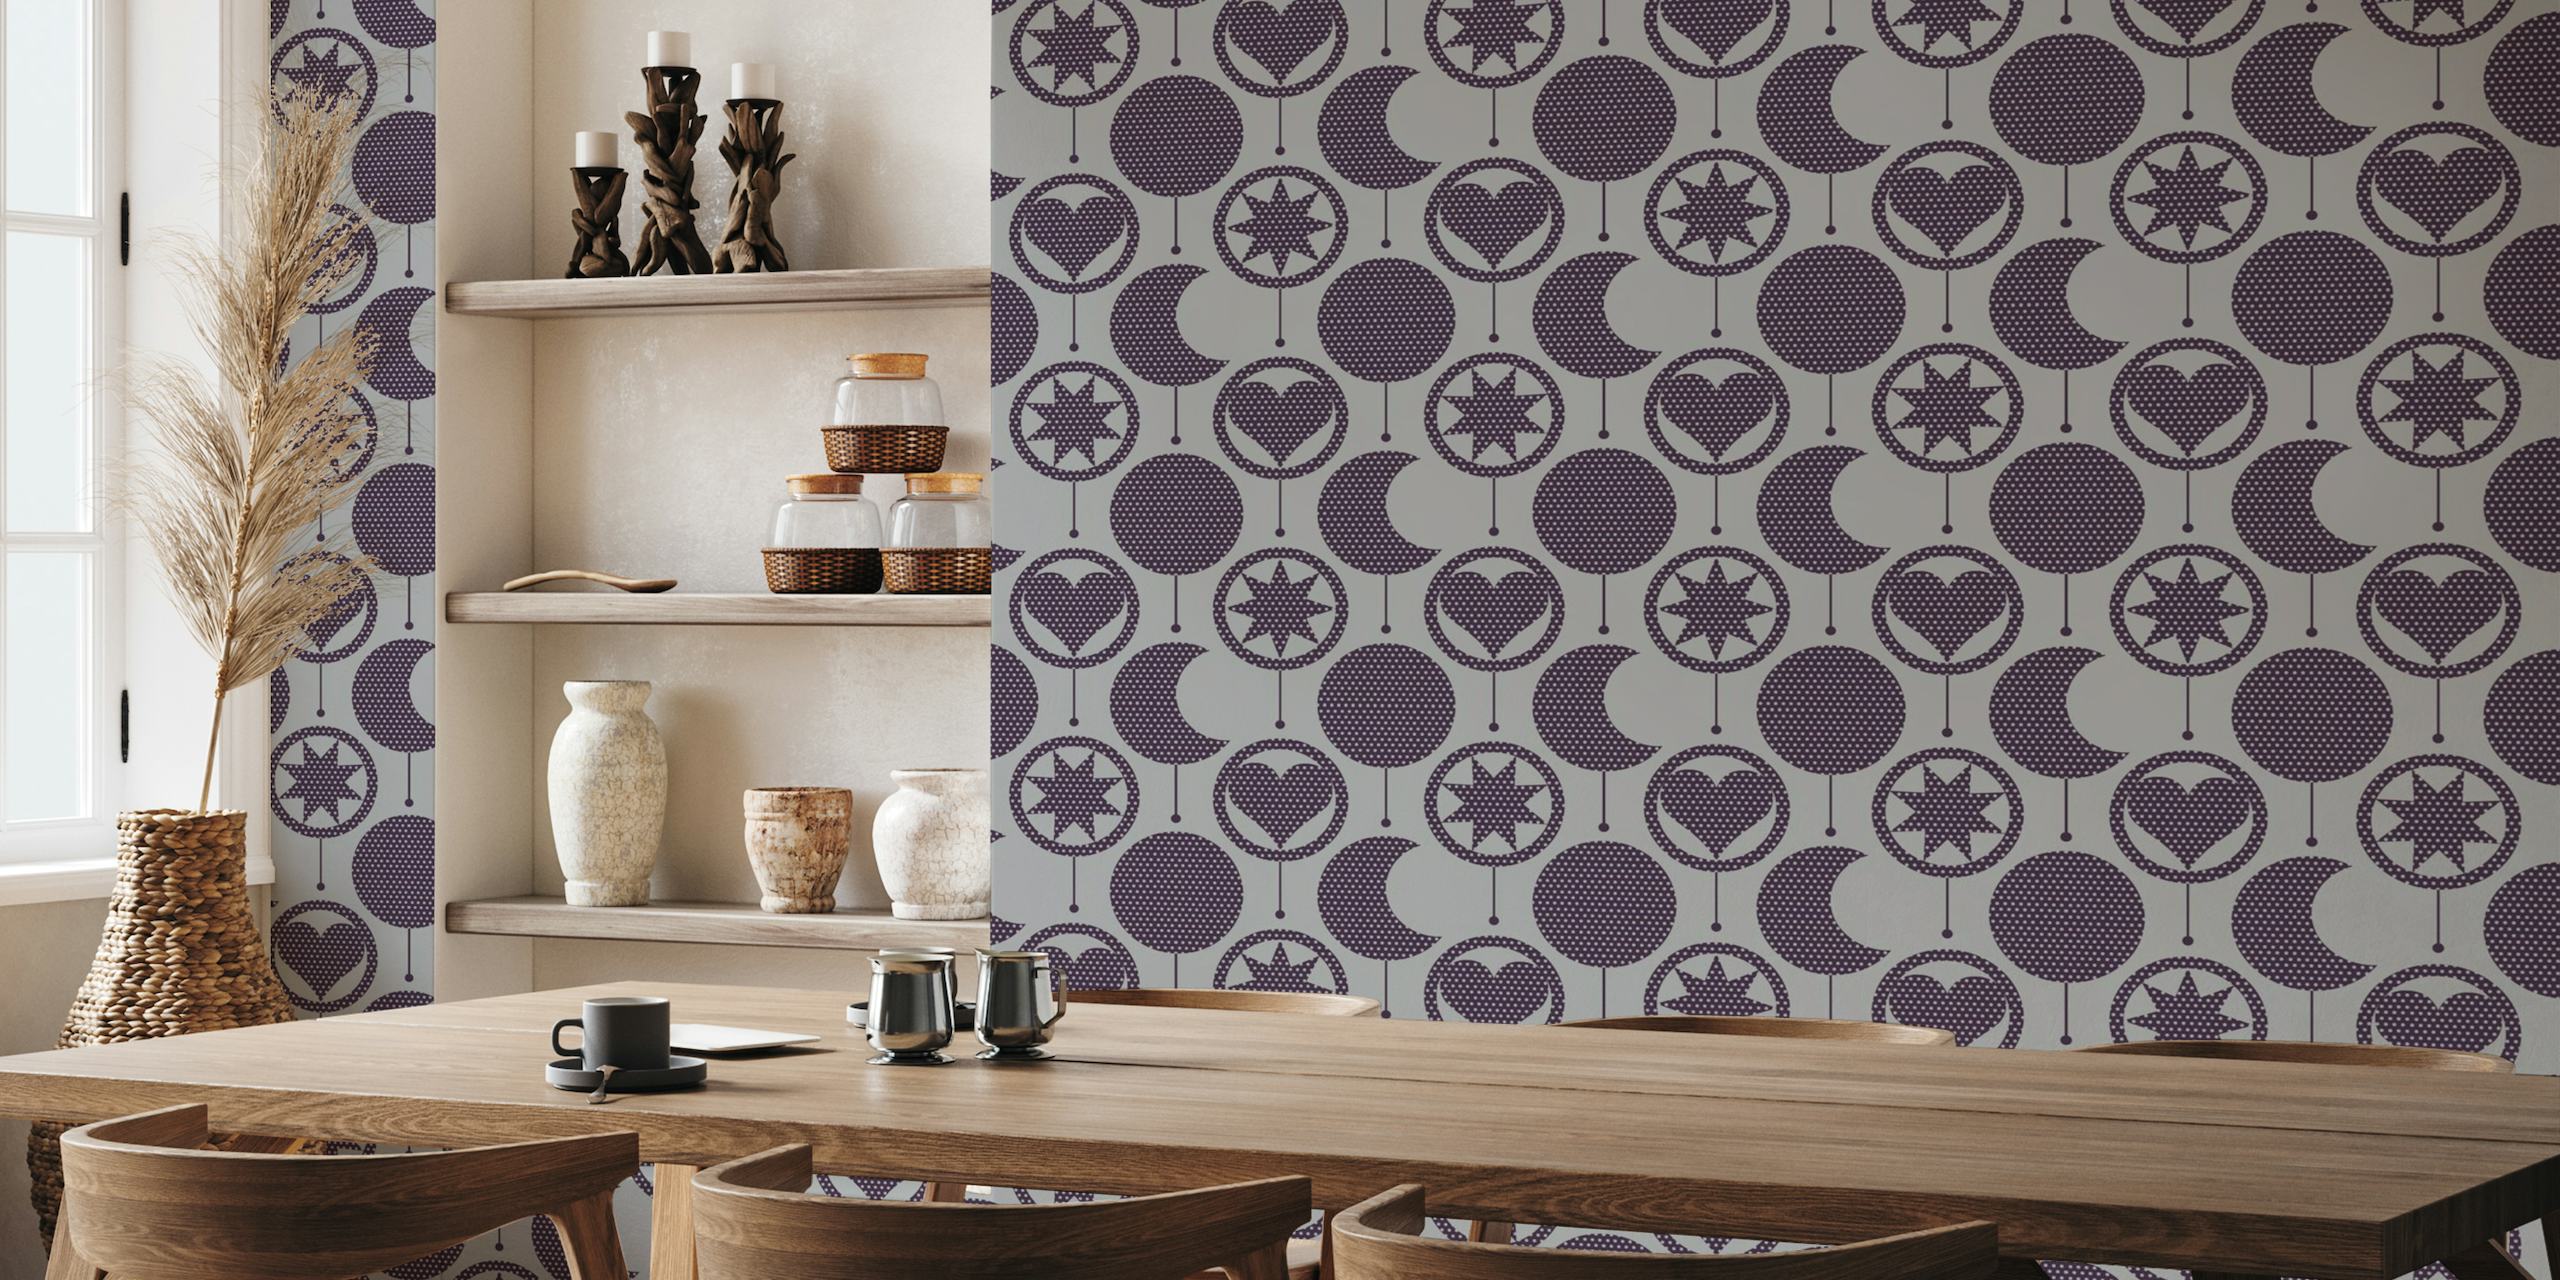 Celestial bodied-themed wall mural with dotty patterns on a deep purple background